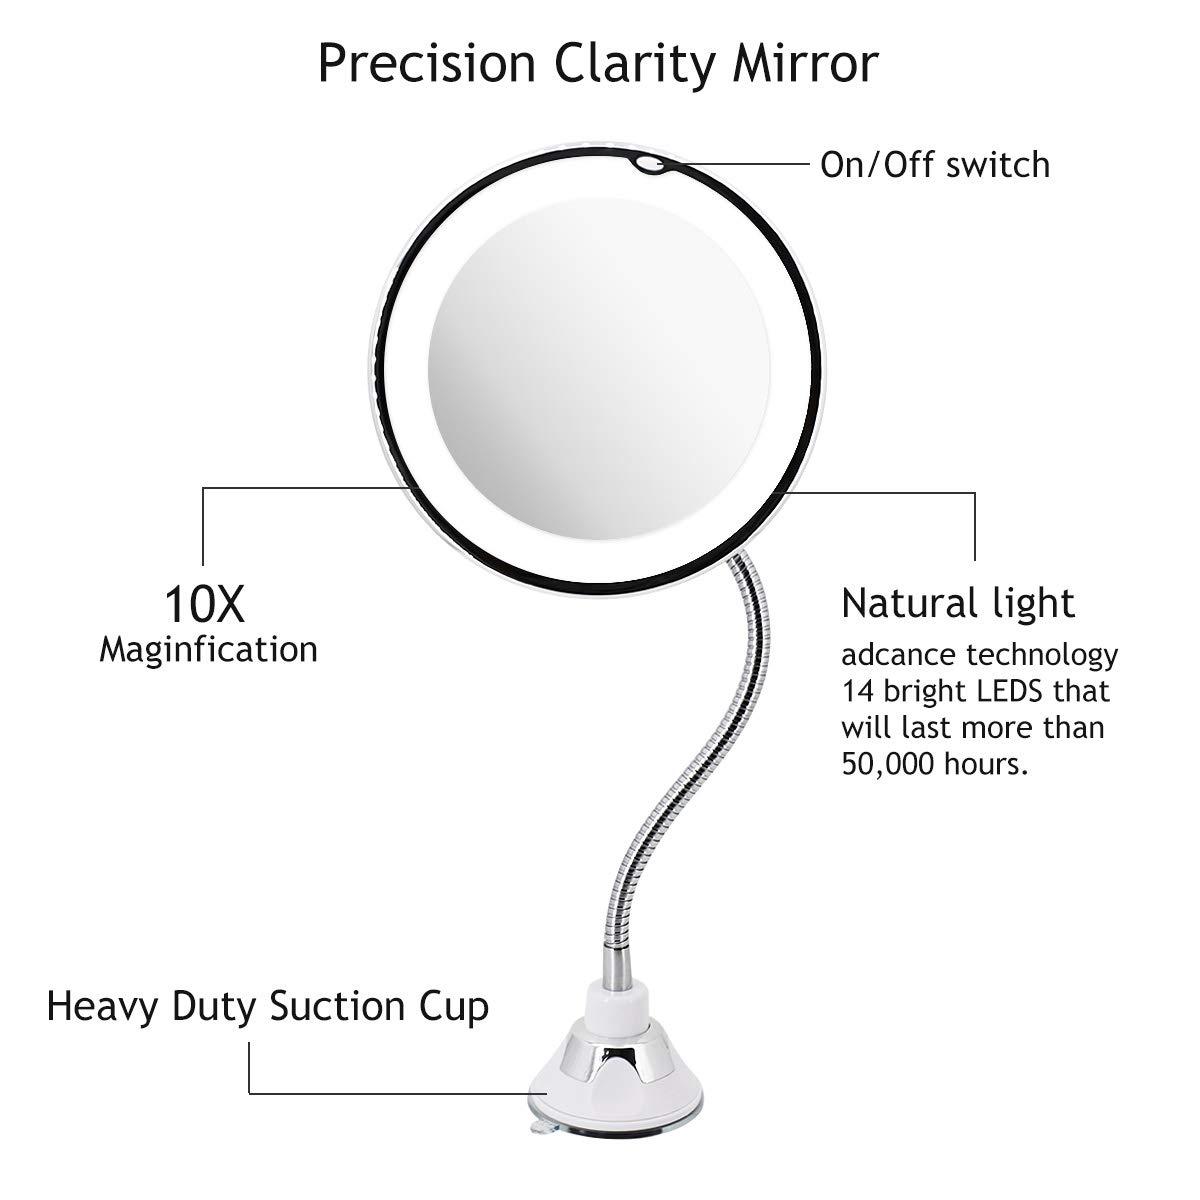 Glam Hobby Magnifying Glass in Home Health Care 